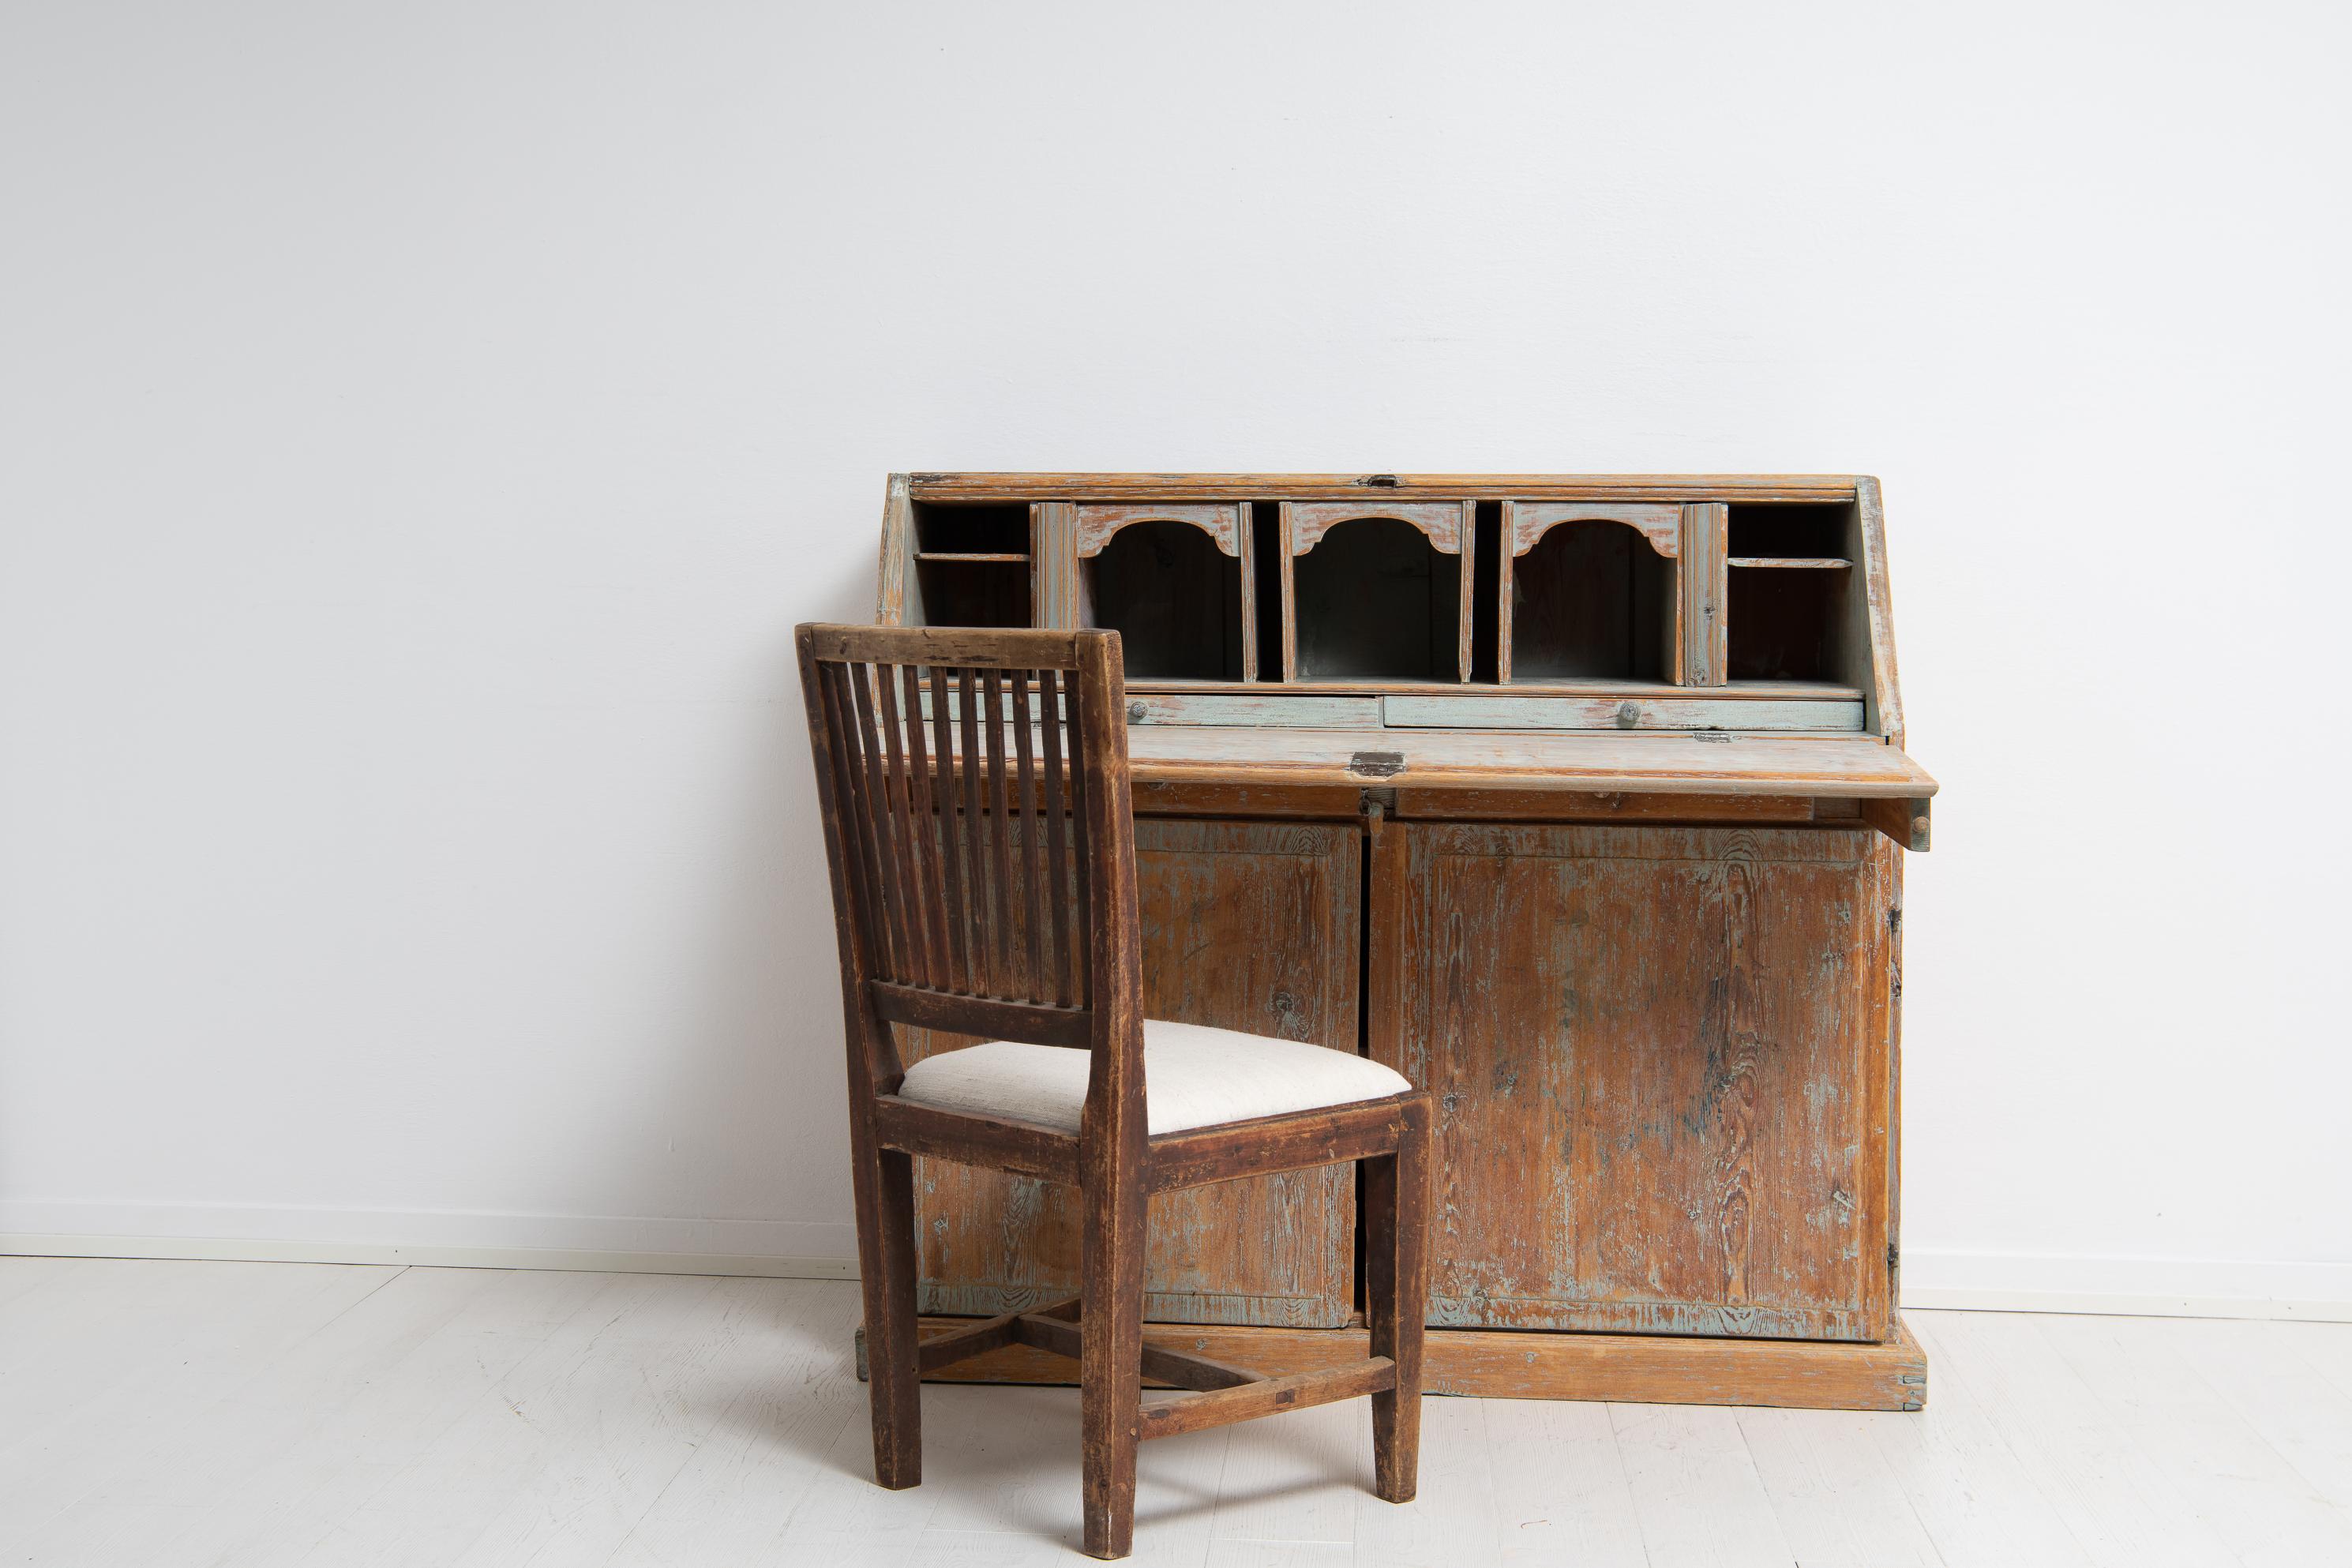 Hand-Crafted Early 19th Century Swedish Folk Art Country Secretary Desk For Sale